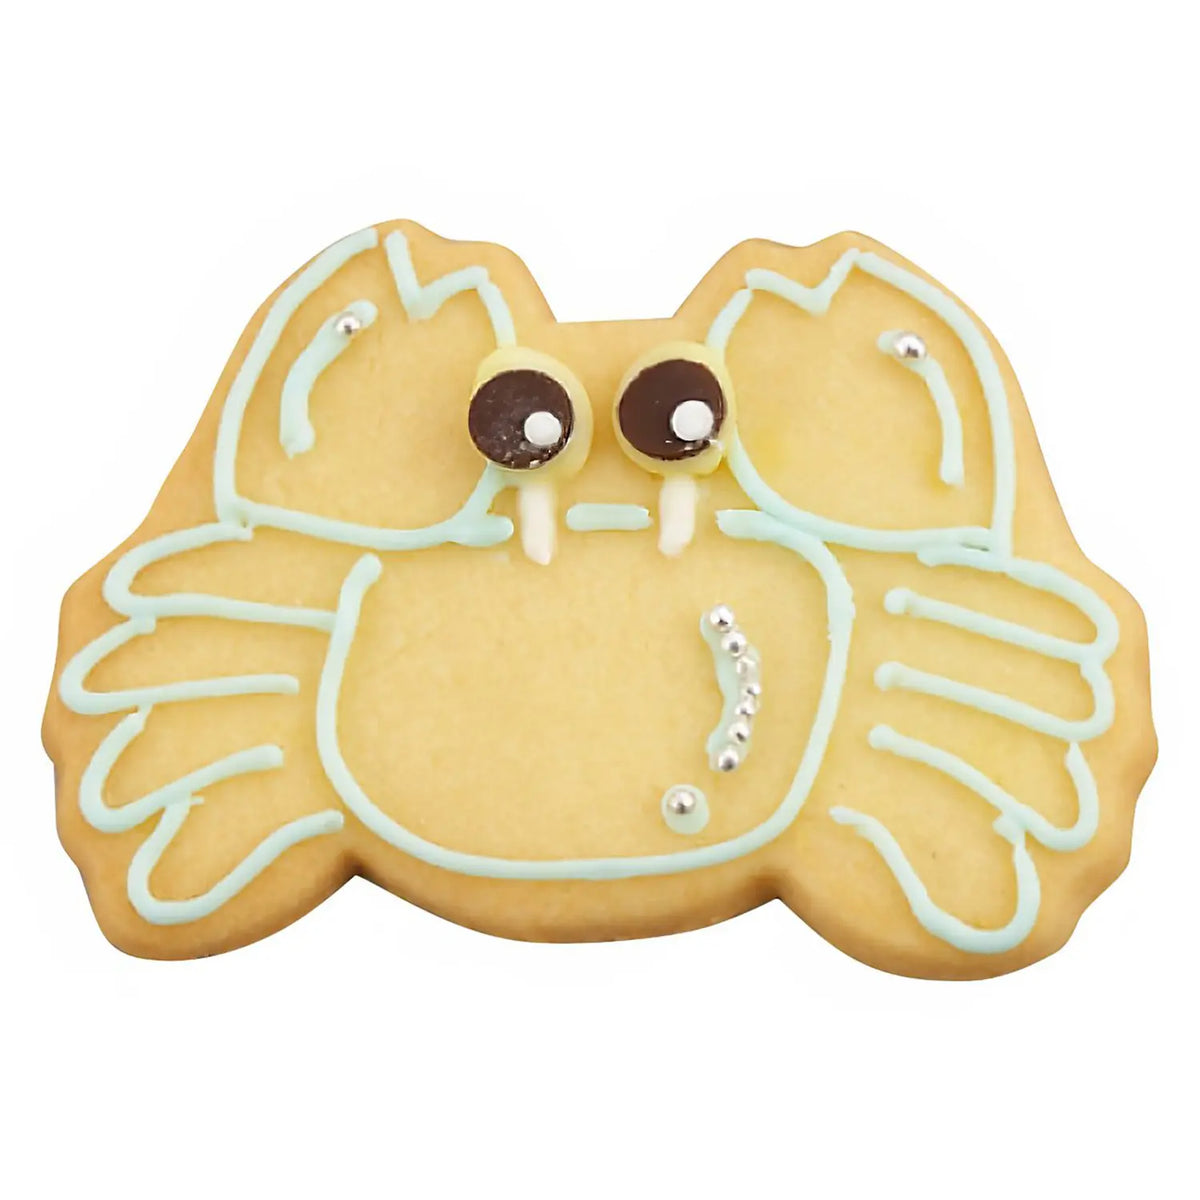 TIGERCROWN Cake Land Stainless Steel Cookie Cutter Crab